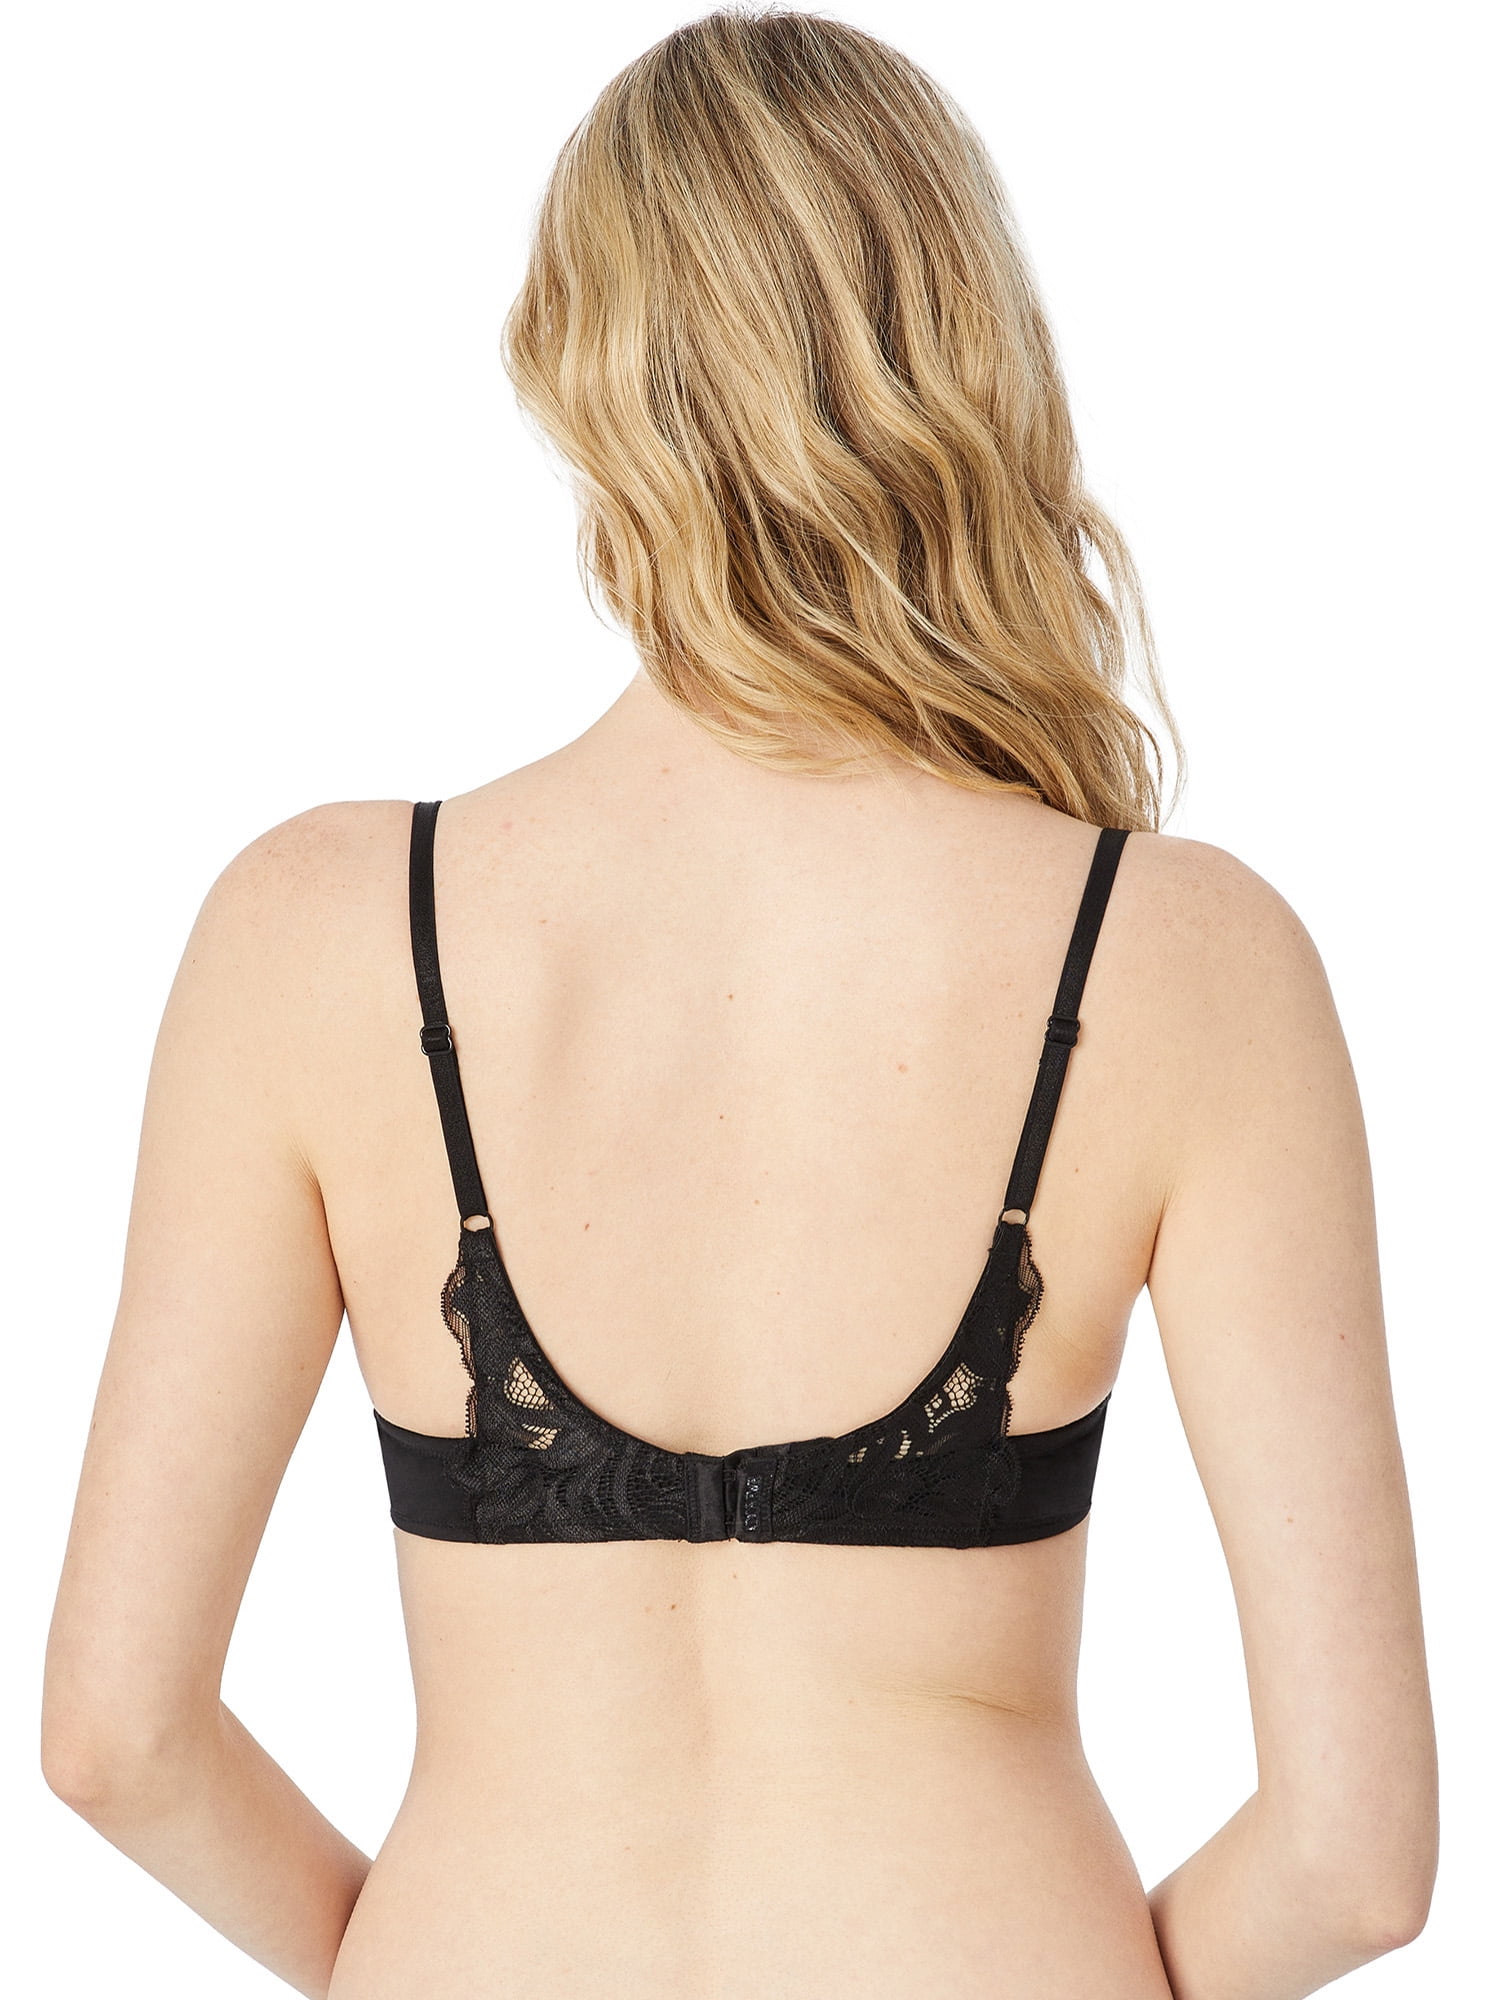 Adored by Adore Me Women's Layla Plunge Push Up Underwire